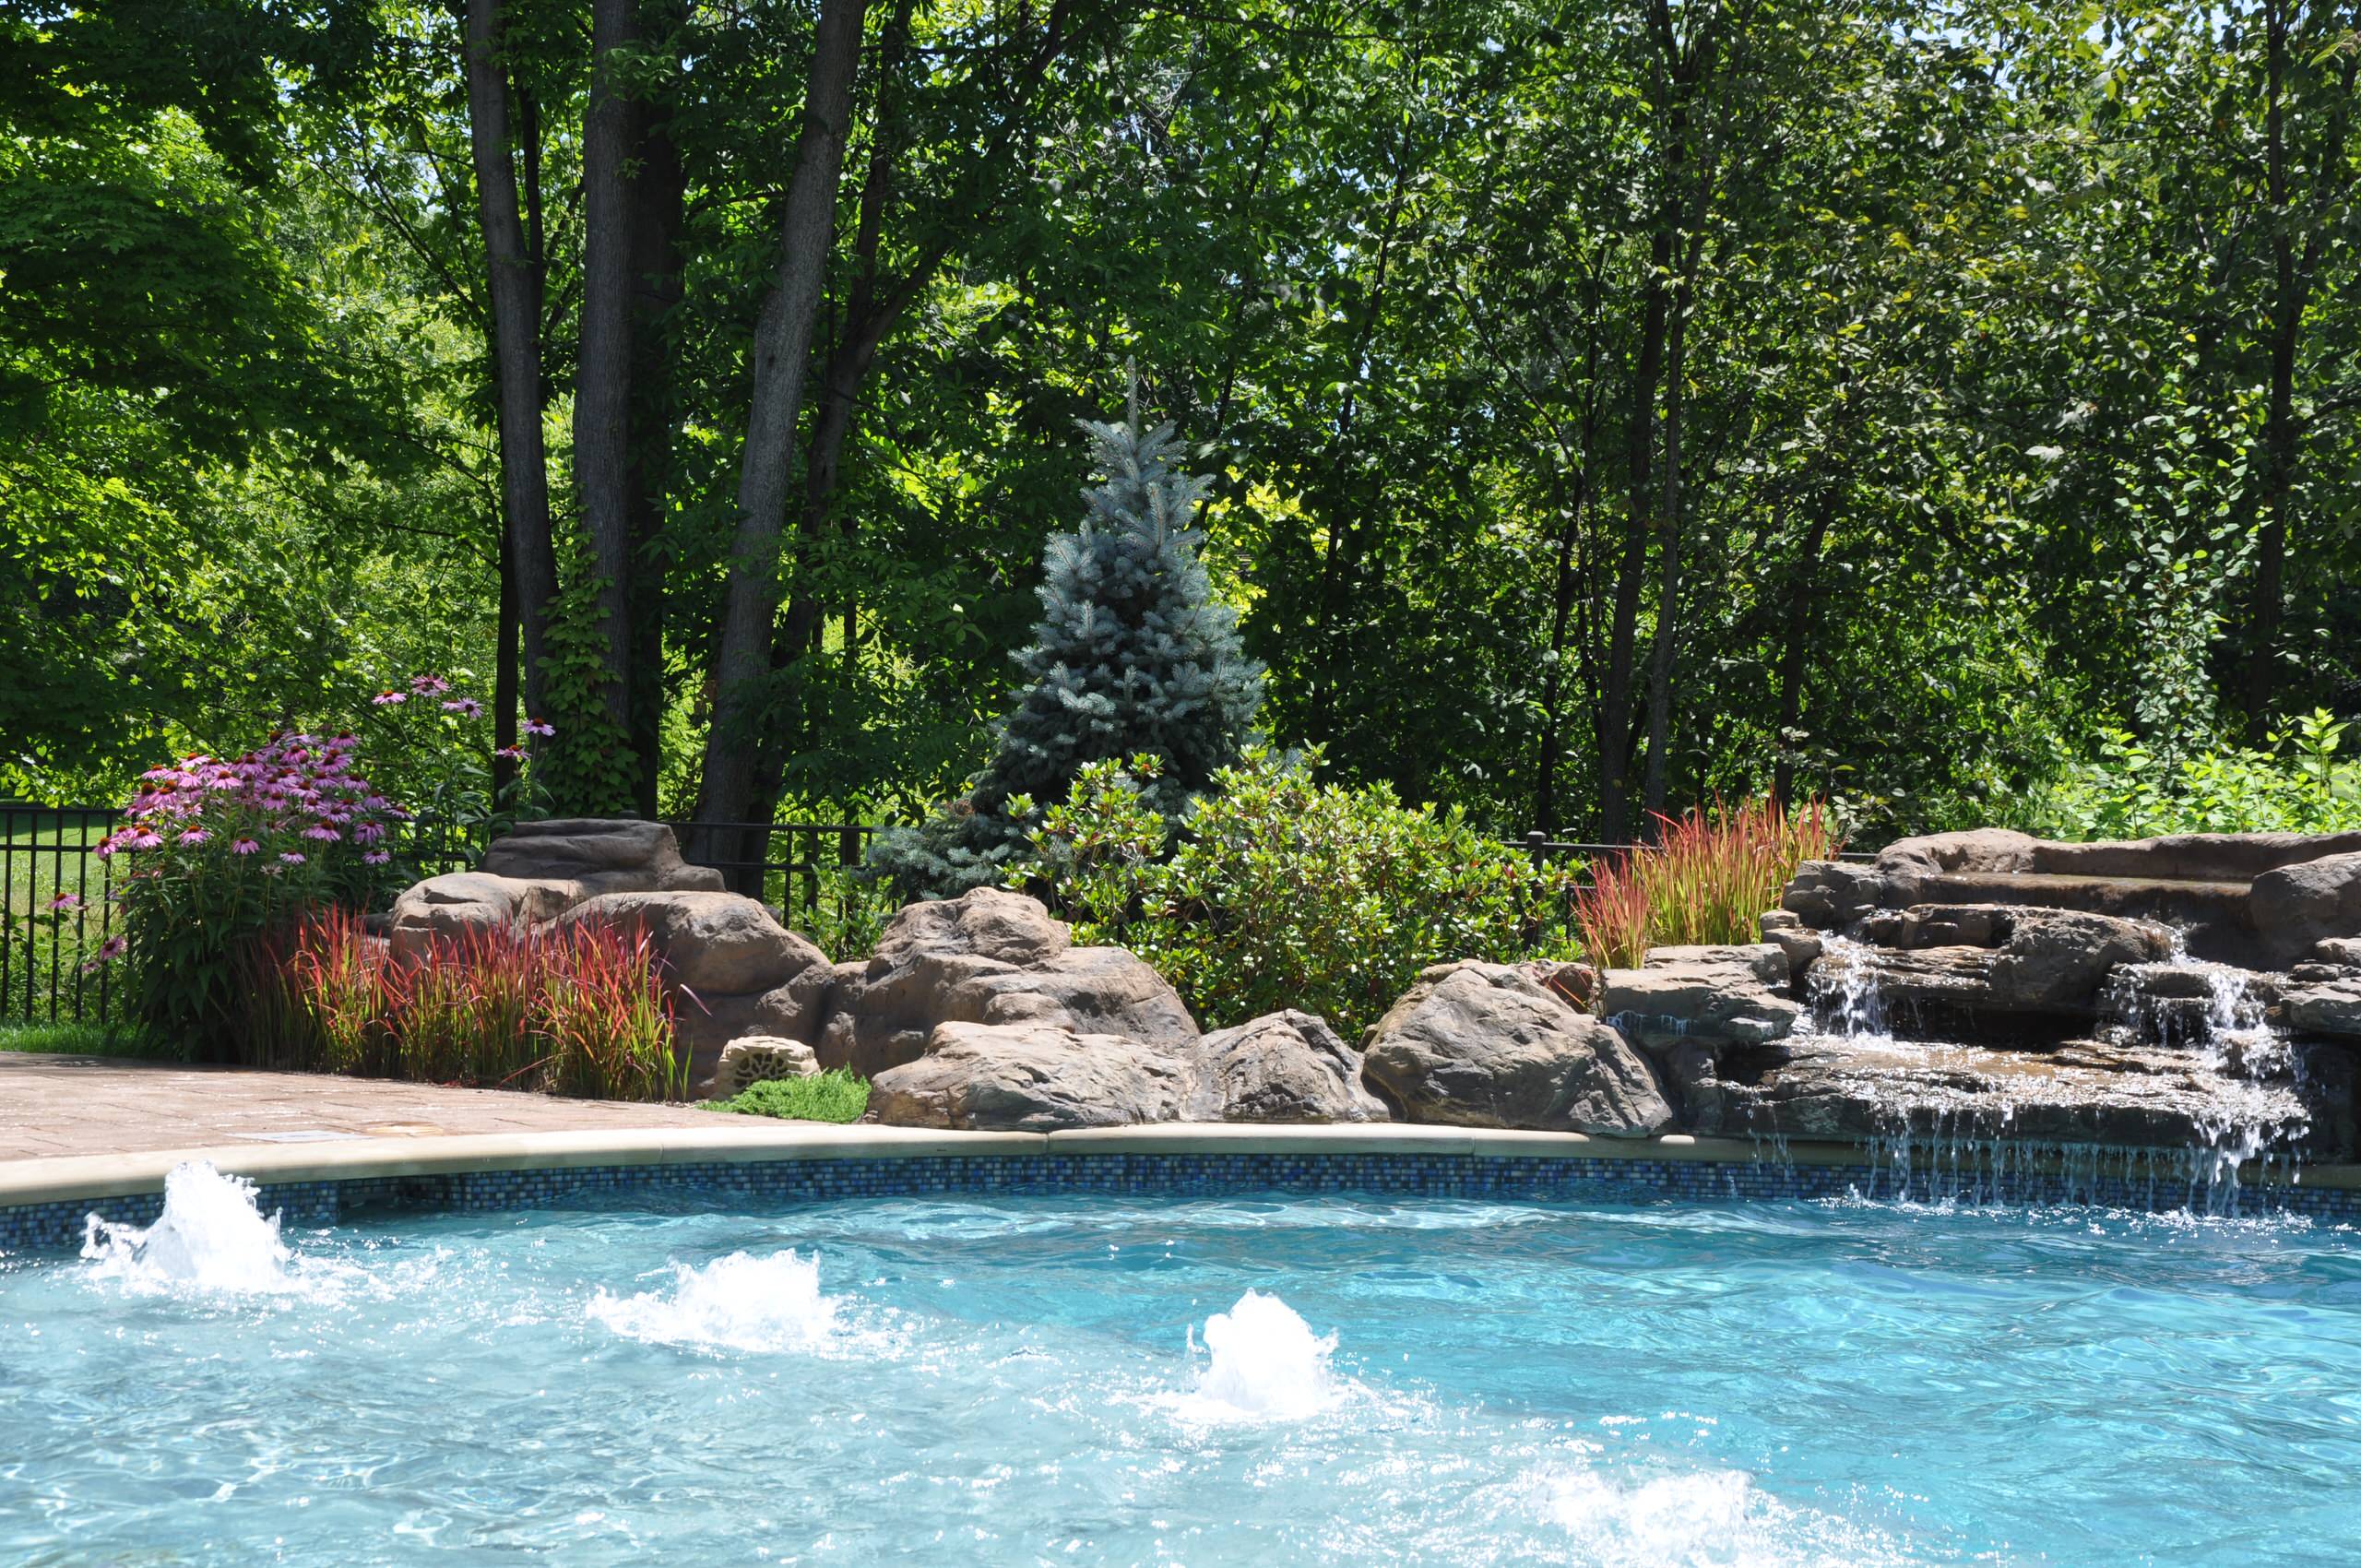 Top Award Winning Project-A Spa Overlook - Residence in Aurora, Ohio